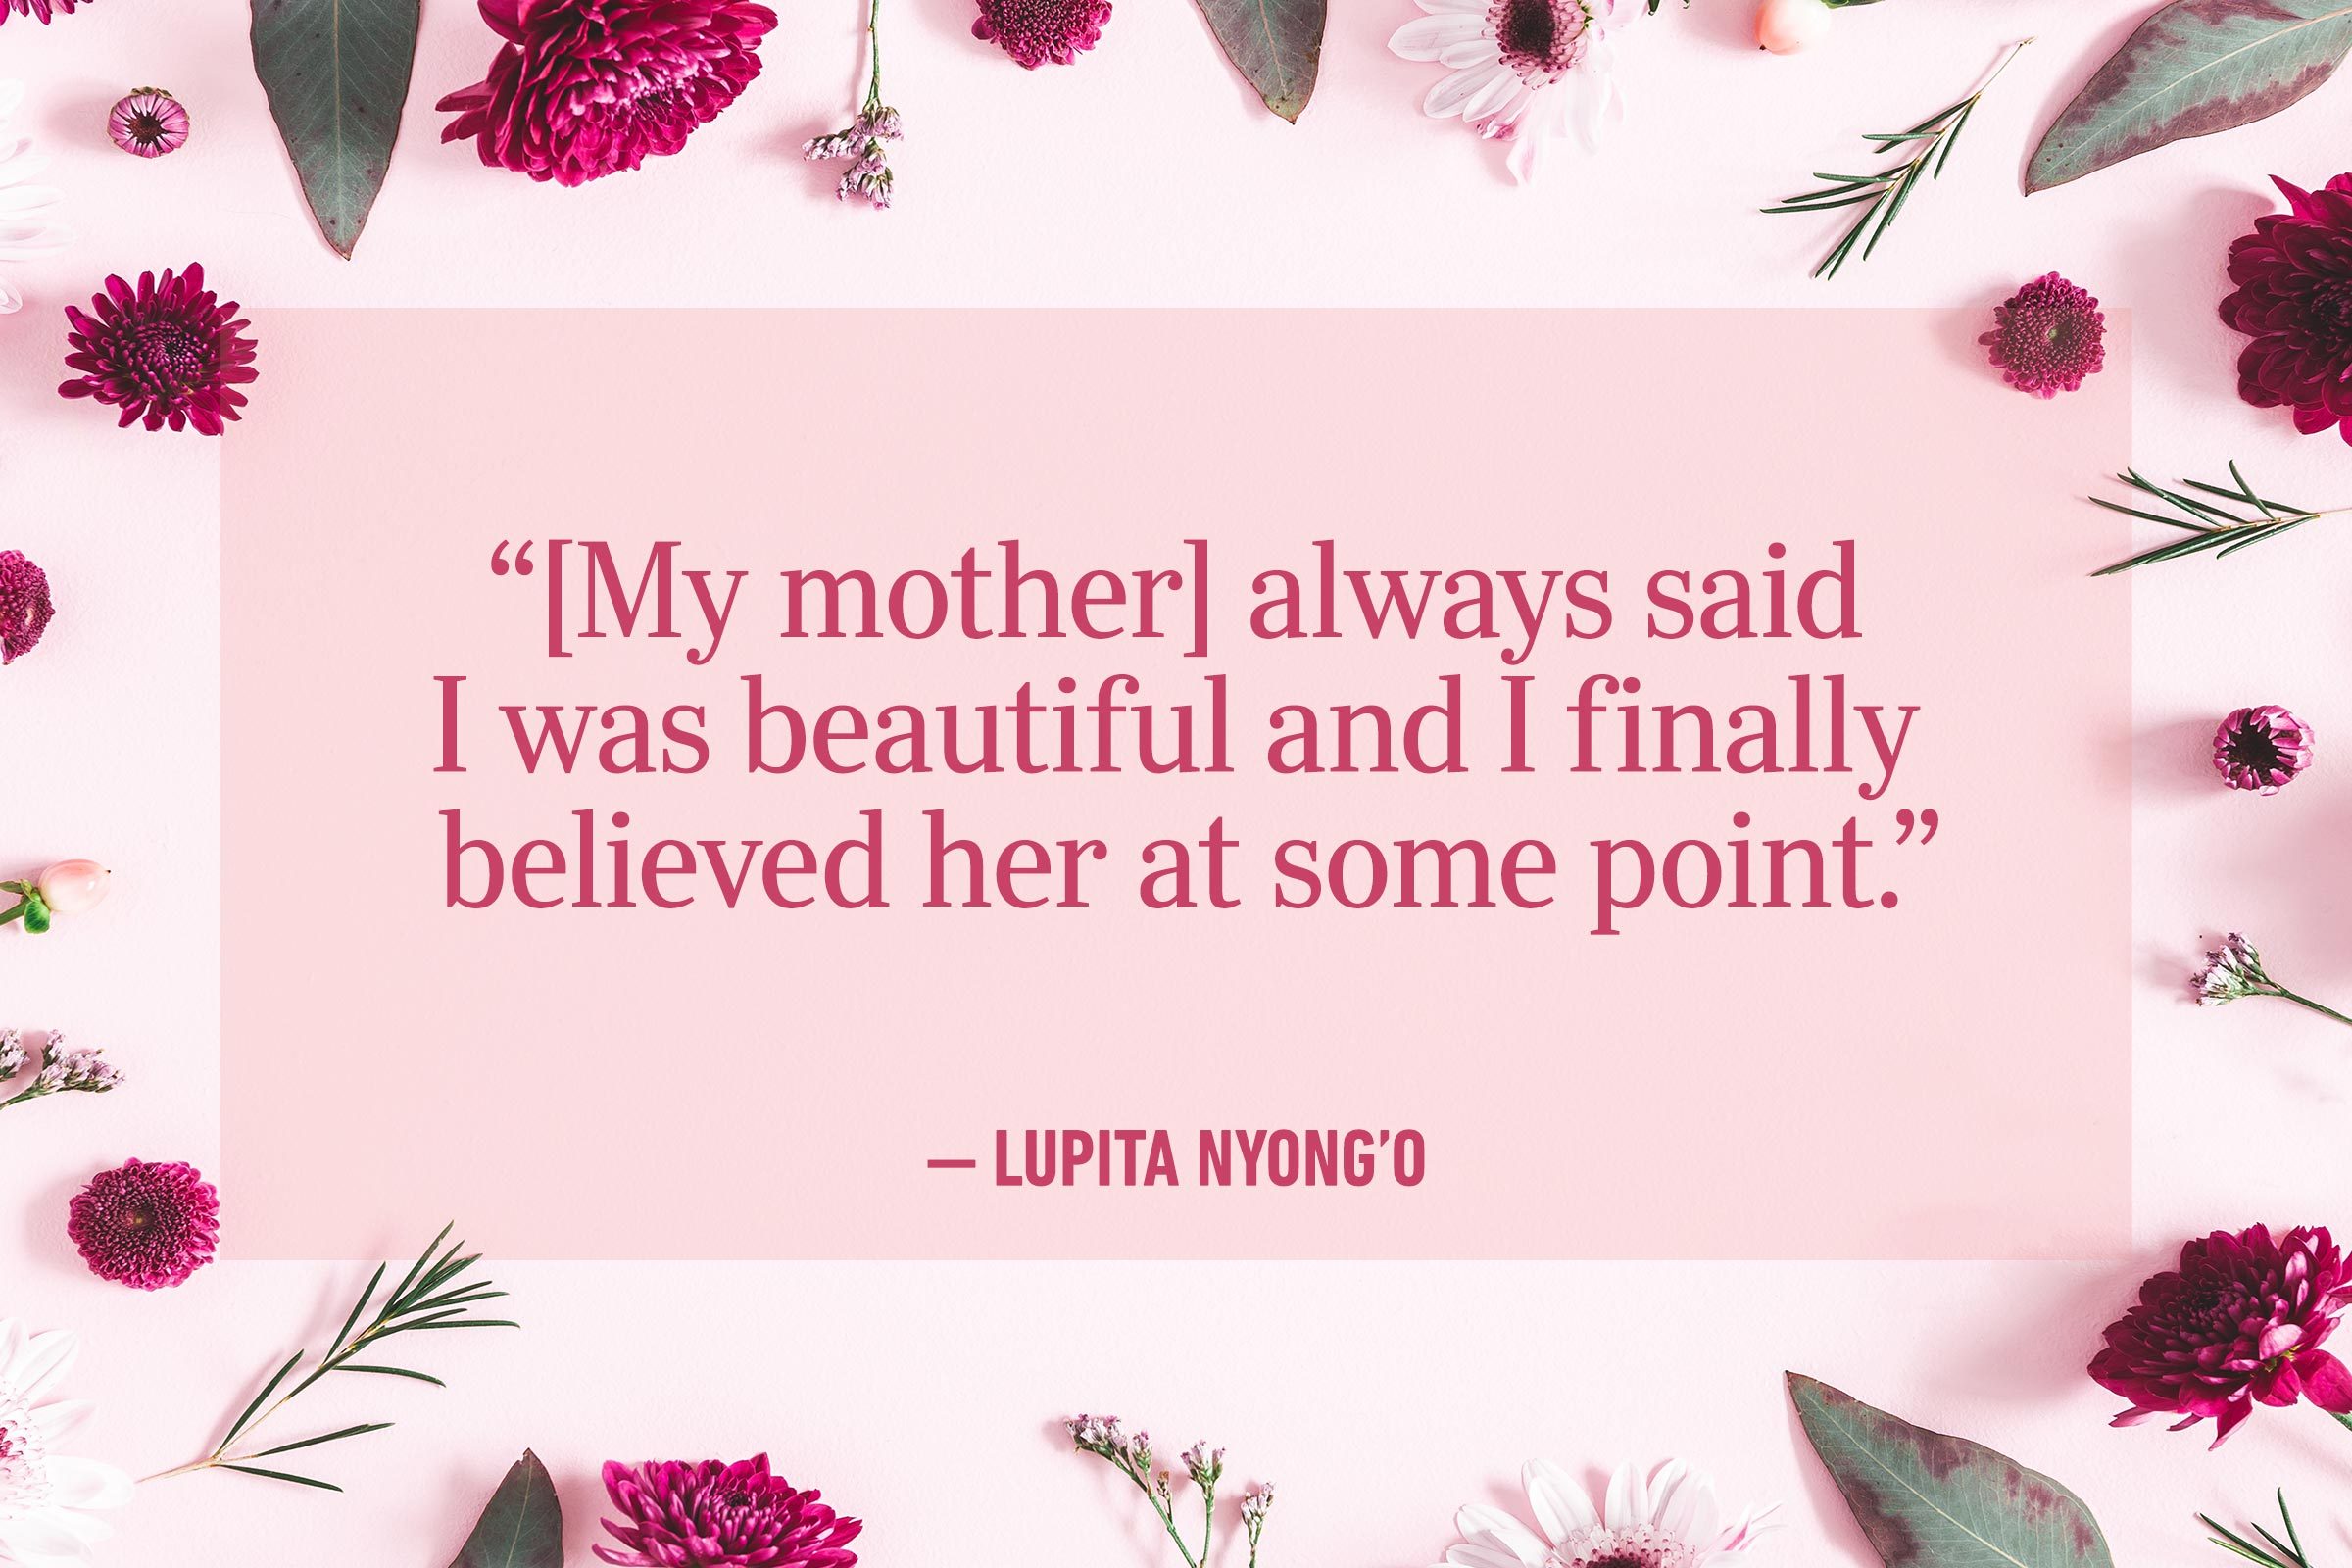 40 Mother's Day Quotes to Show Mom You Care | Reader's Digest